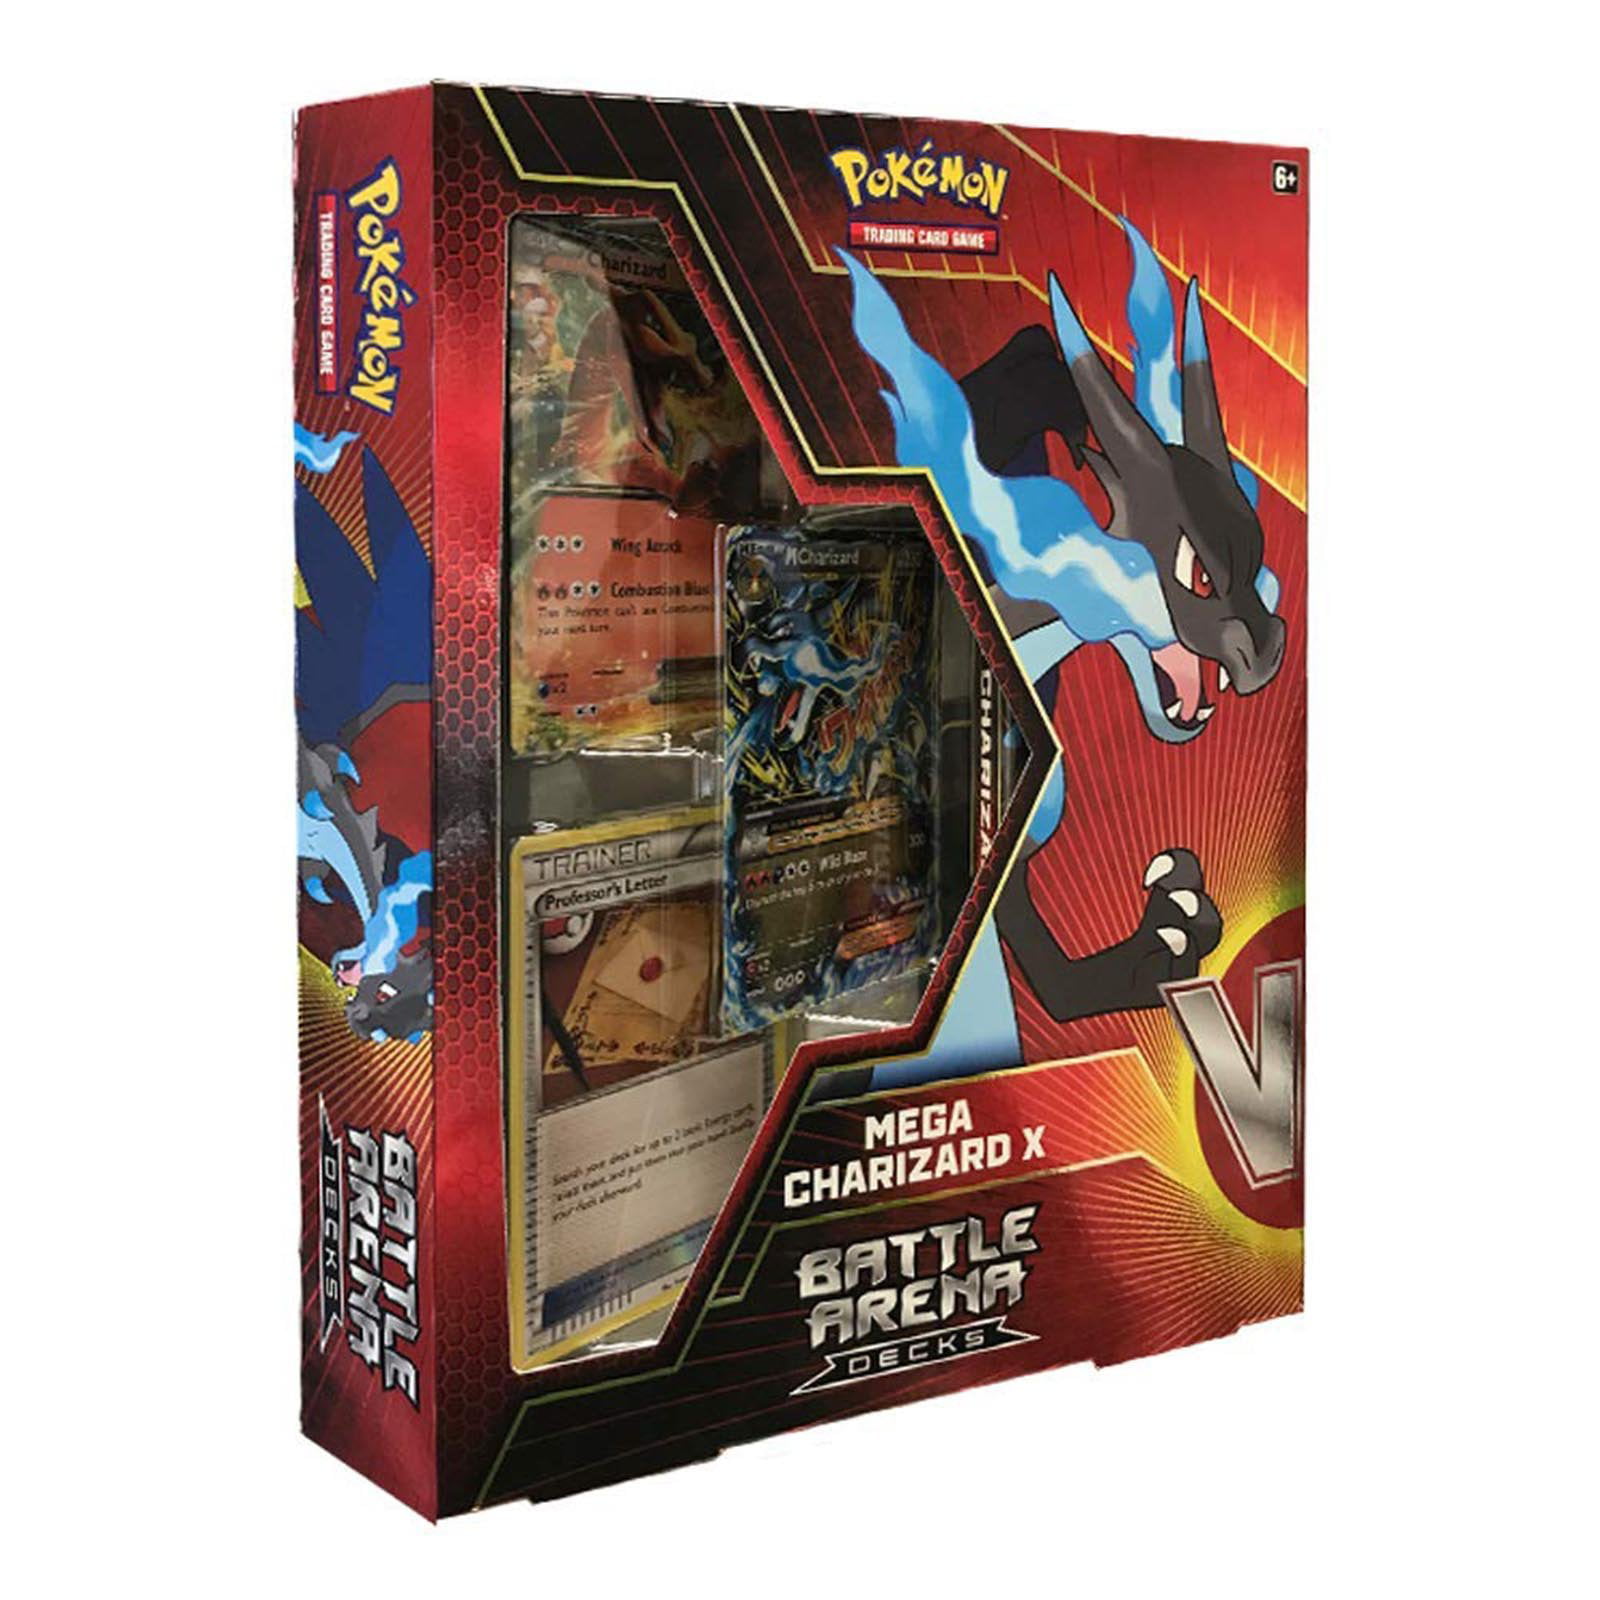 Pokemon Mega Charizard X EX Battle Arena Deck with Coin New 58 Cards 